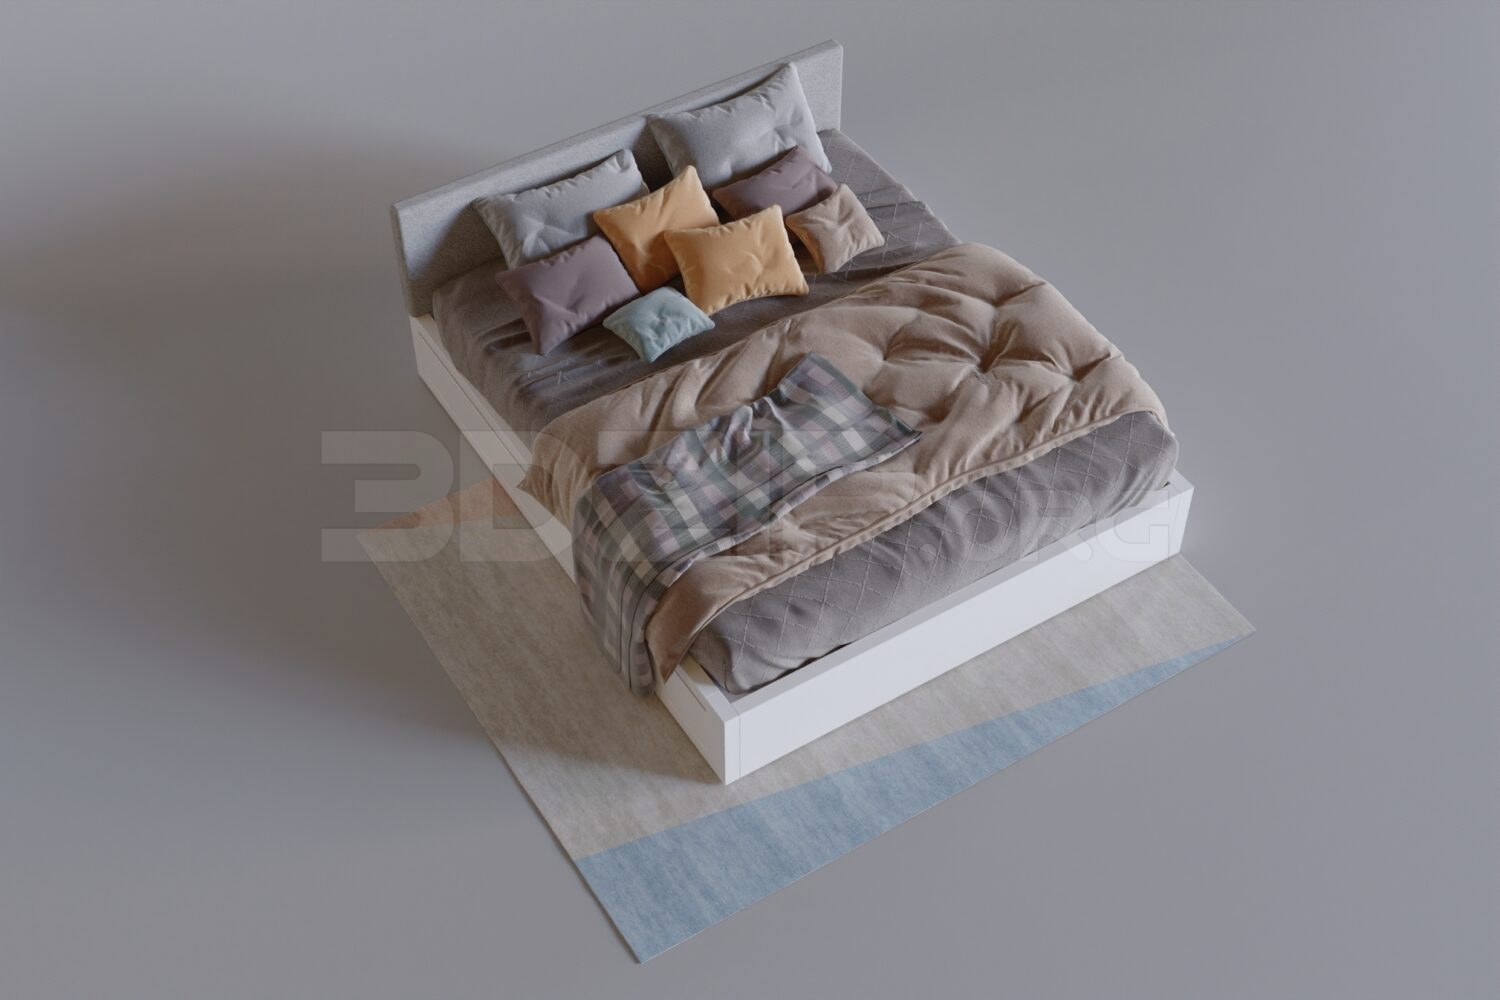 224. Download Free Bed Model By Duc Nguyen